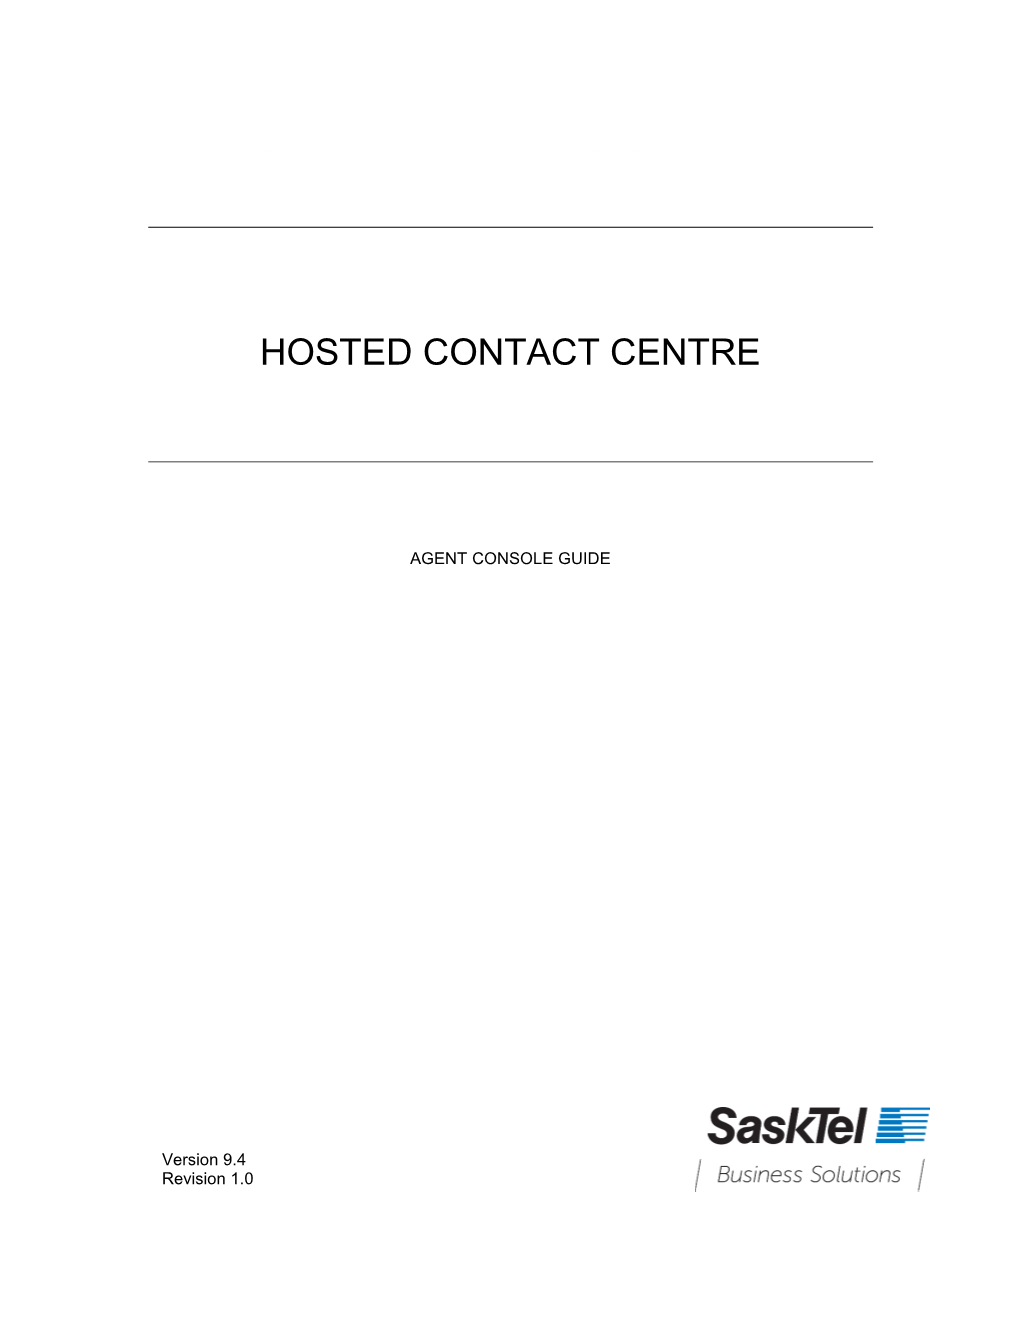 Hosted Contact Centre